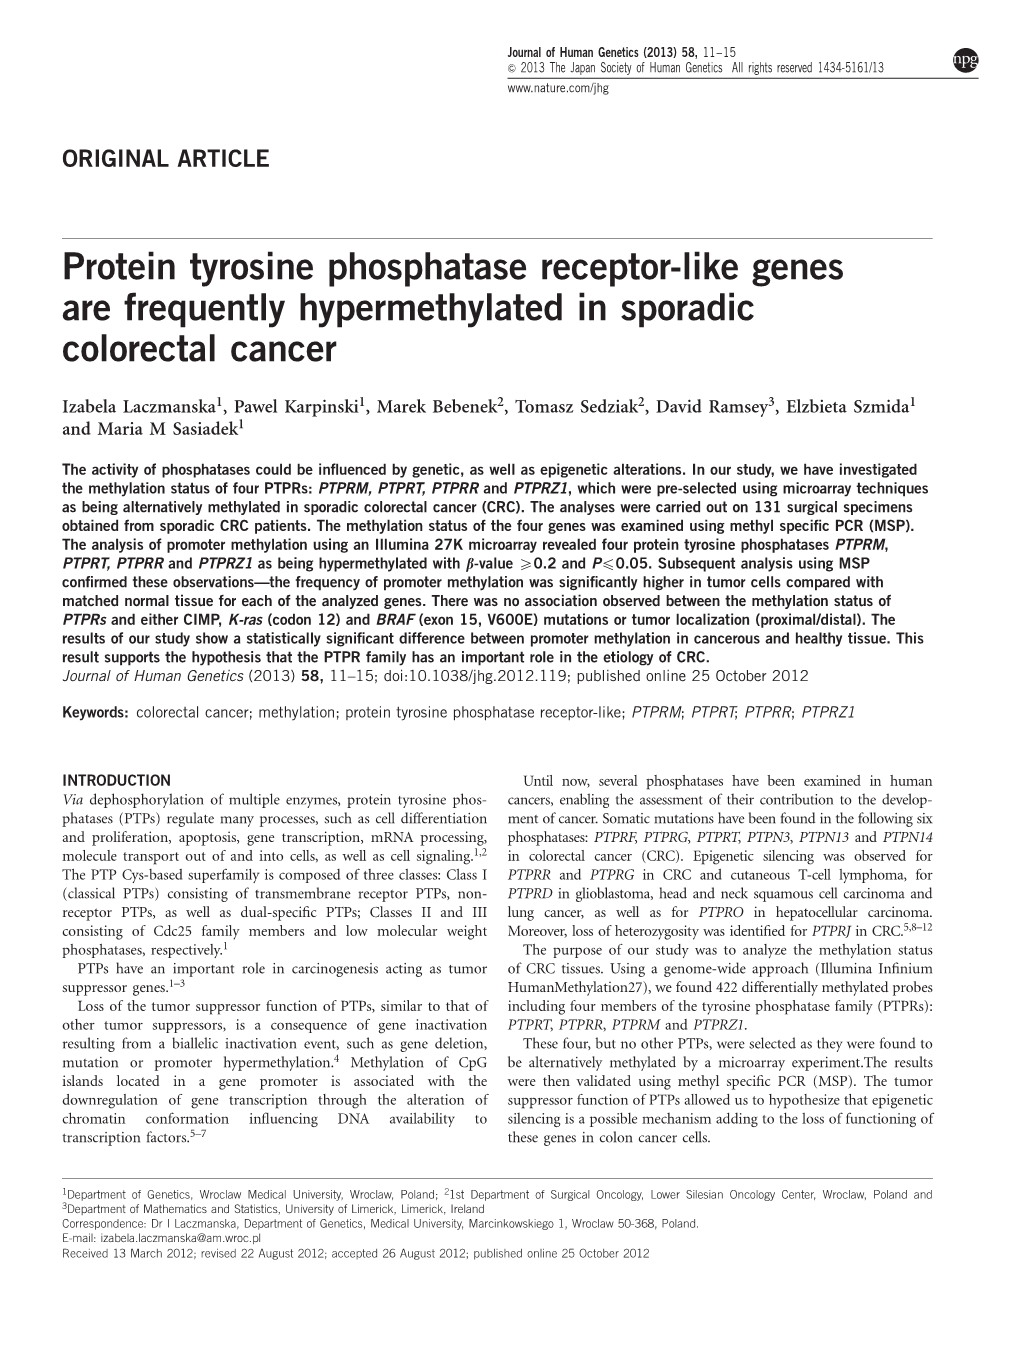 Protein Tyrosine Phosphatase Receptor-Like Genes Are Frequently Hypermethylated in Sporadic Colorectal Cancer